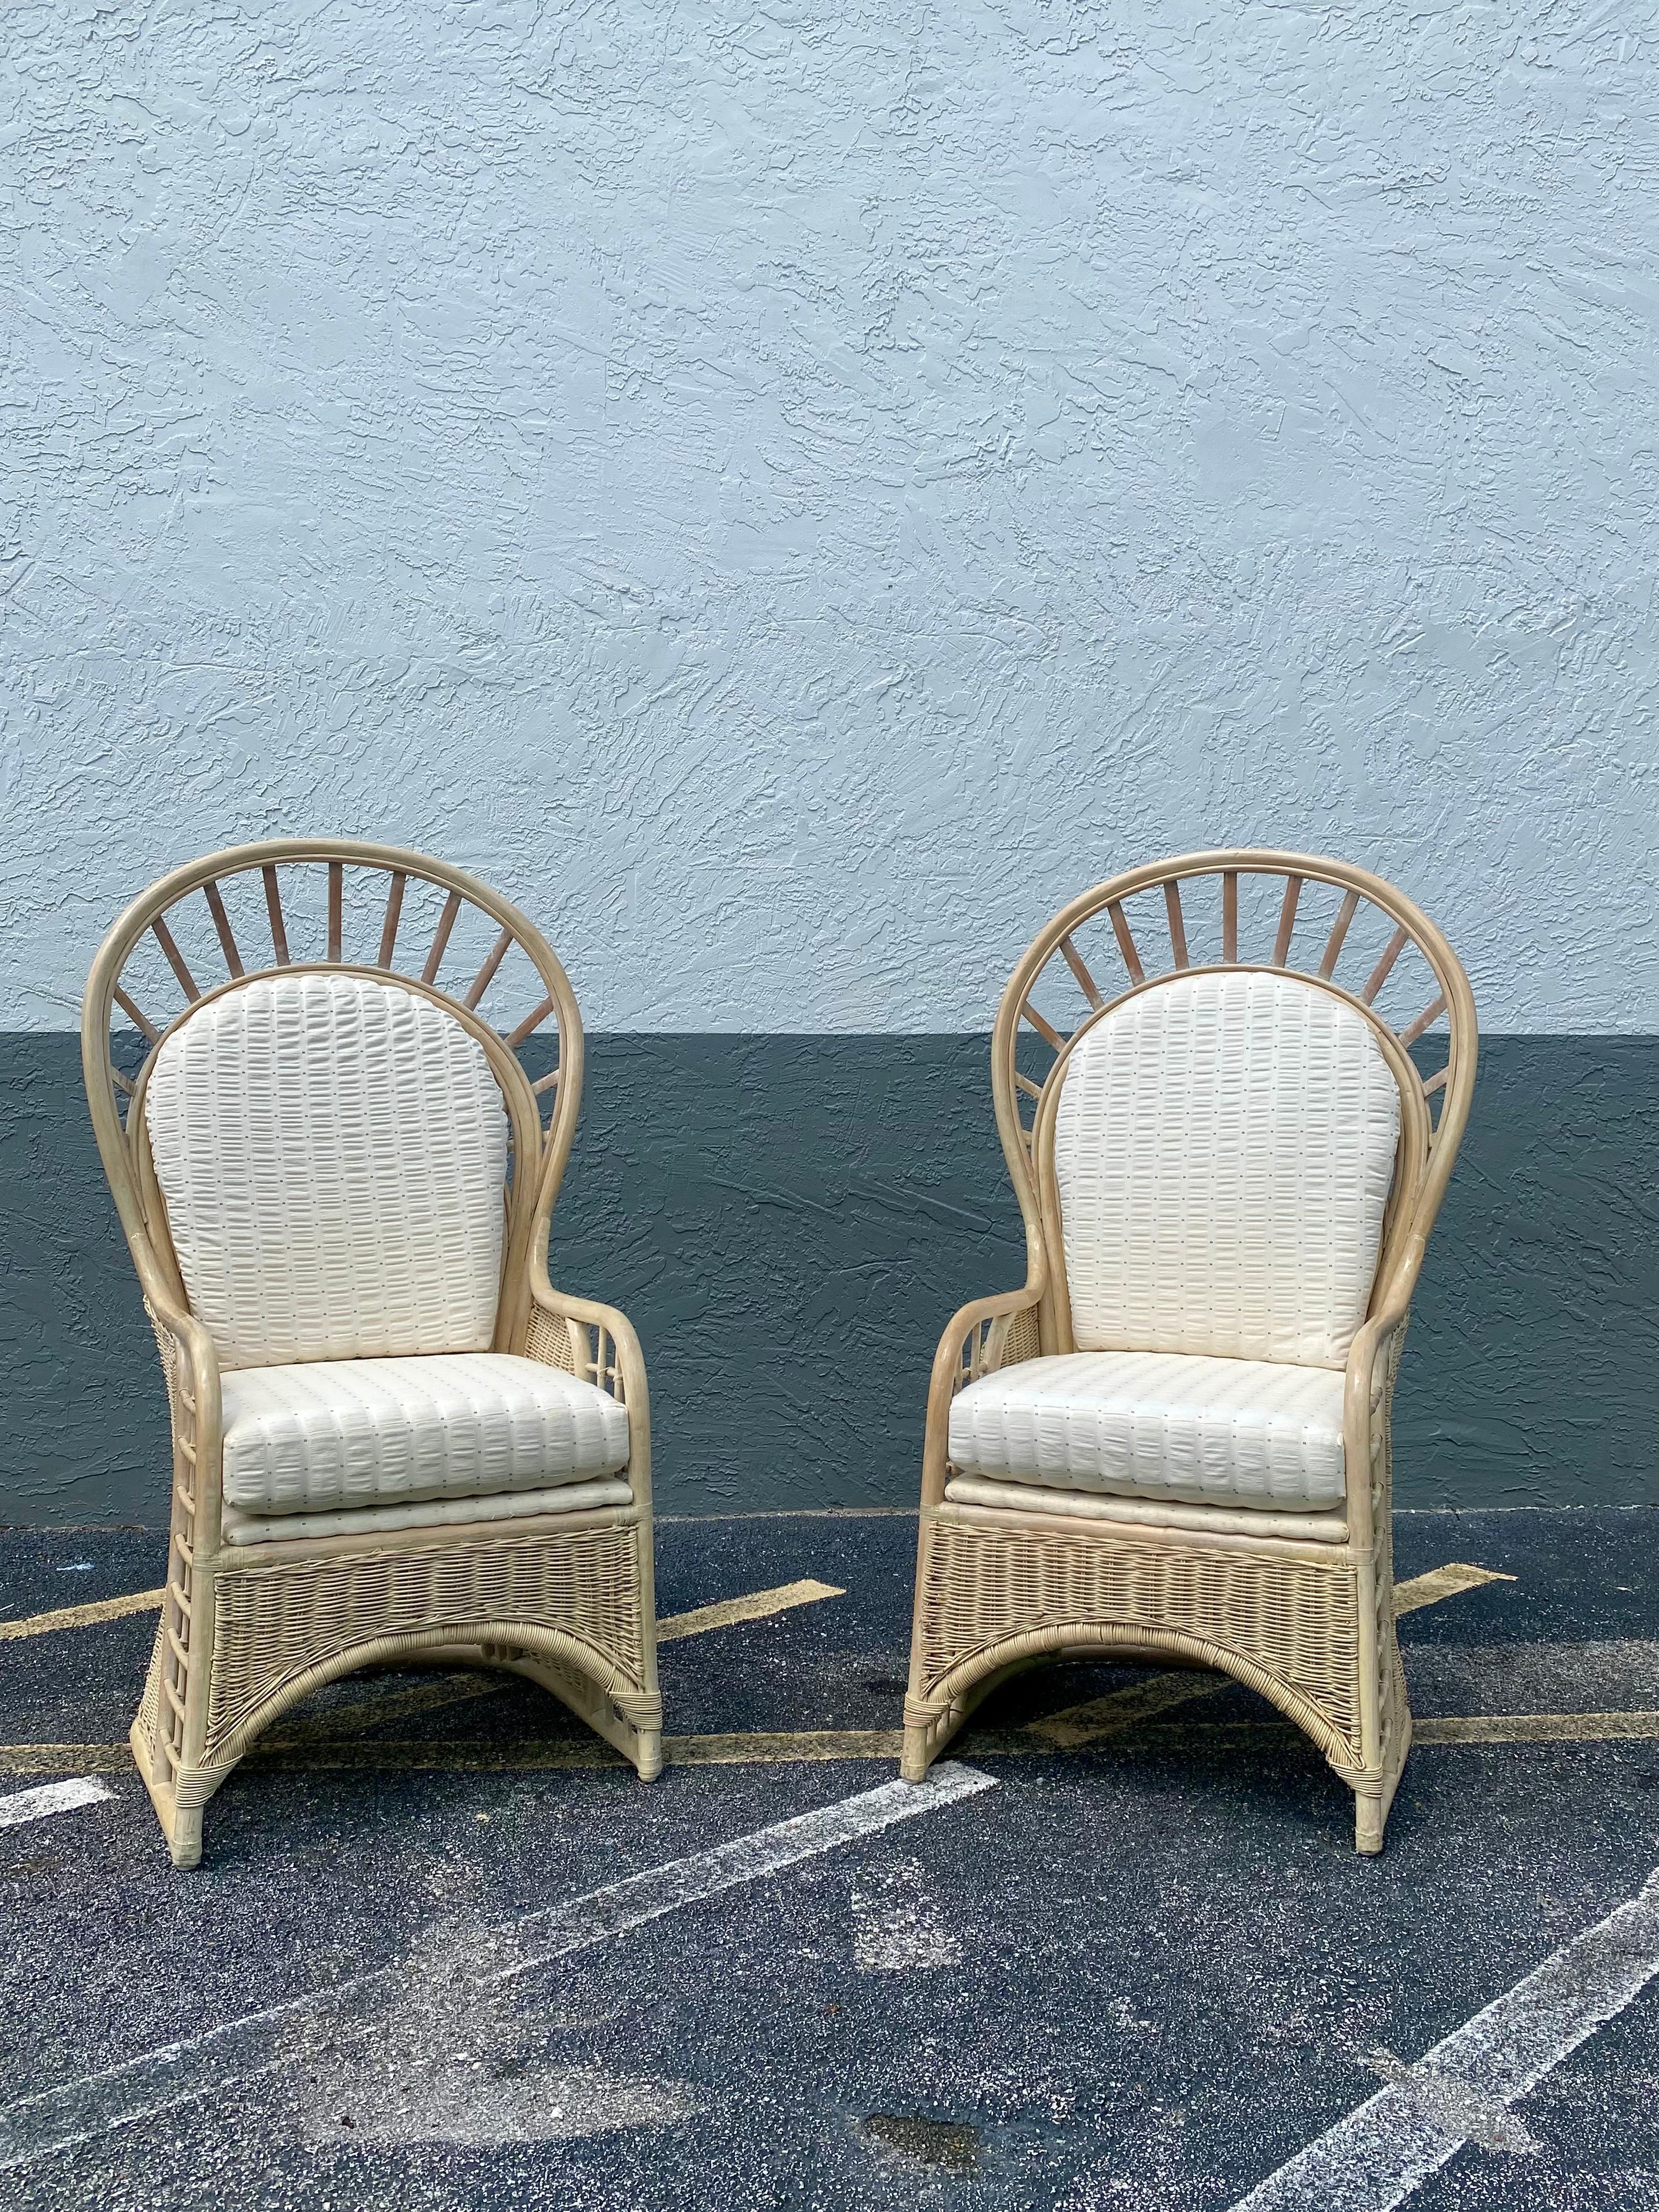 On offer on this occasion is one of the most stunning, rattan chairs you could hope to find. This is an ultra-rare opportunity to acquire what is, unequivocally, the best of the best, it being a most spectacular and beautifully-presented chairs.